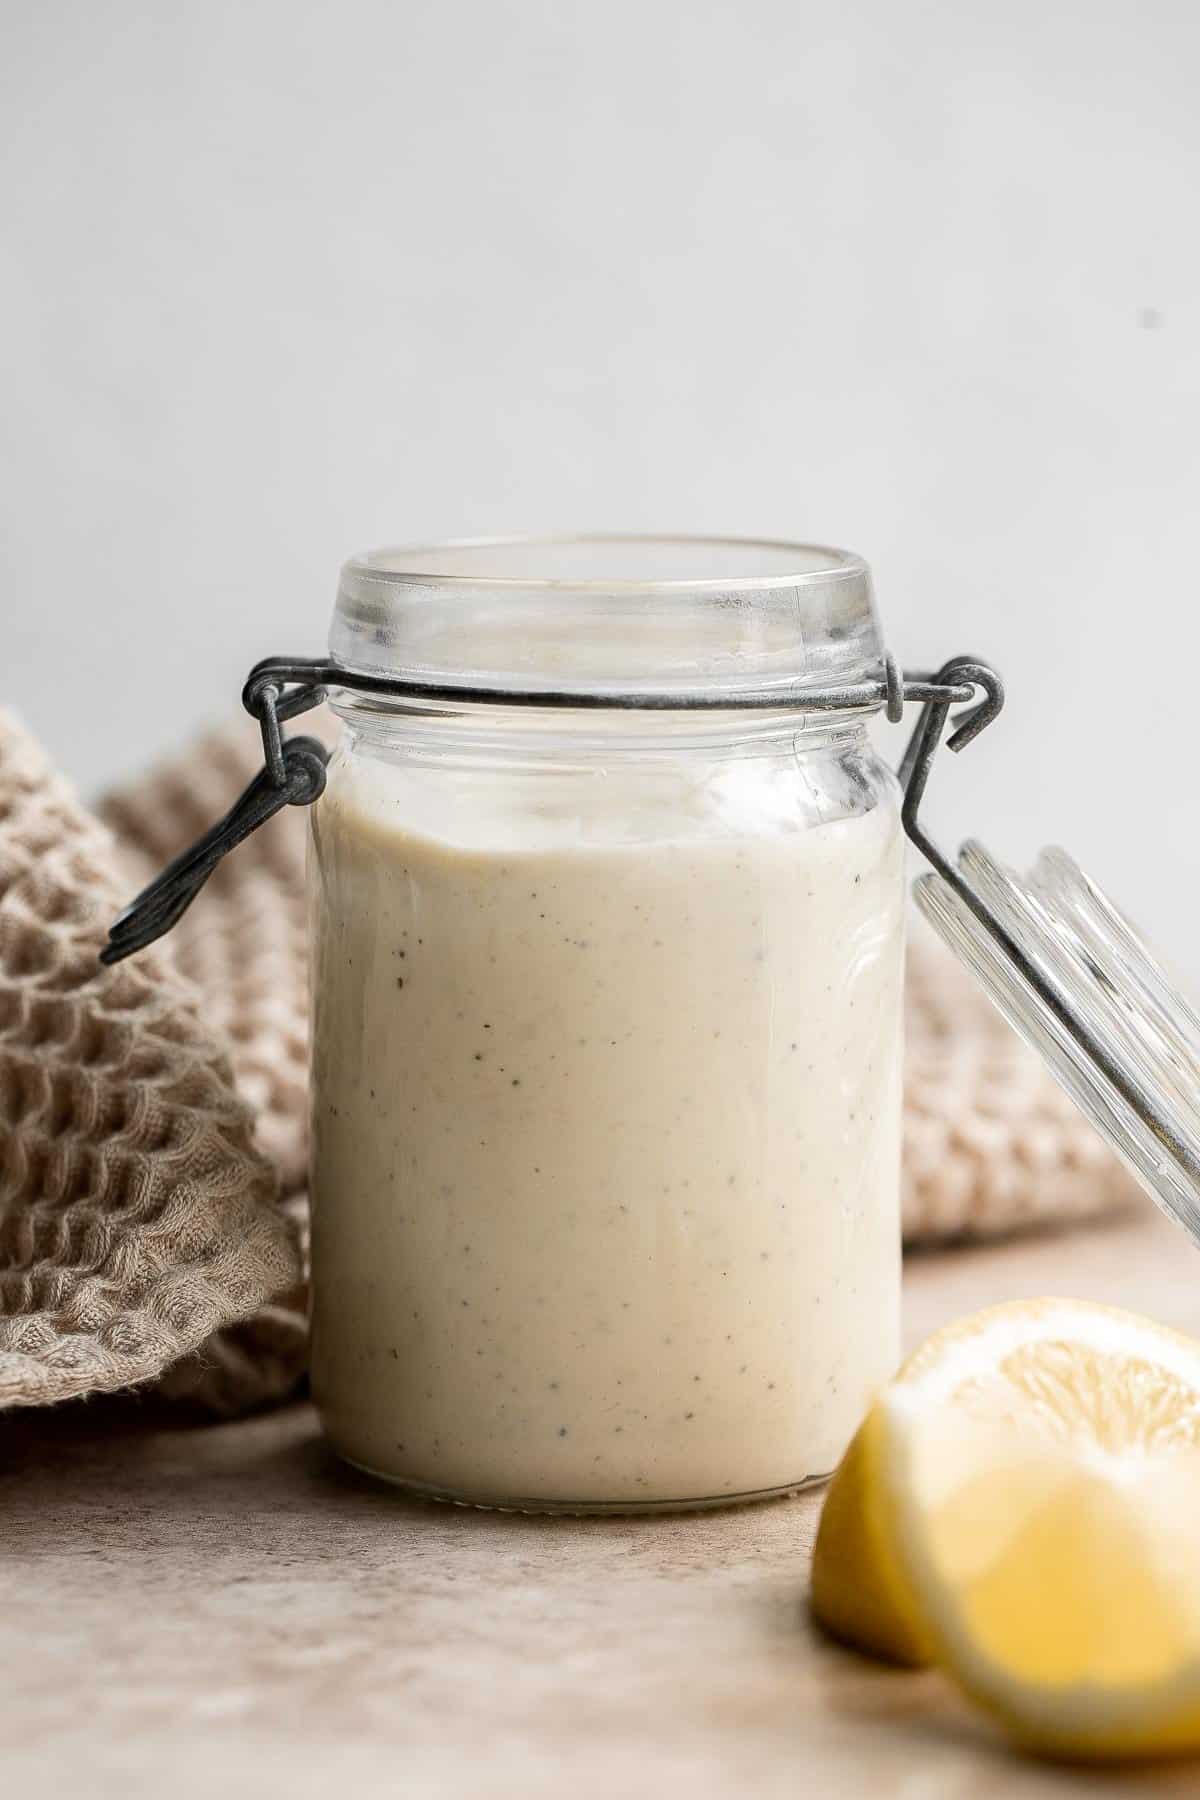 Homemade Caesar Salad Dressing is rich, creamy, and flavorful. It's a quick simple dressing made in minutes with a classic salty, earthy, and umami taste. | aheadofthyme.com